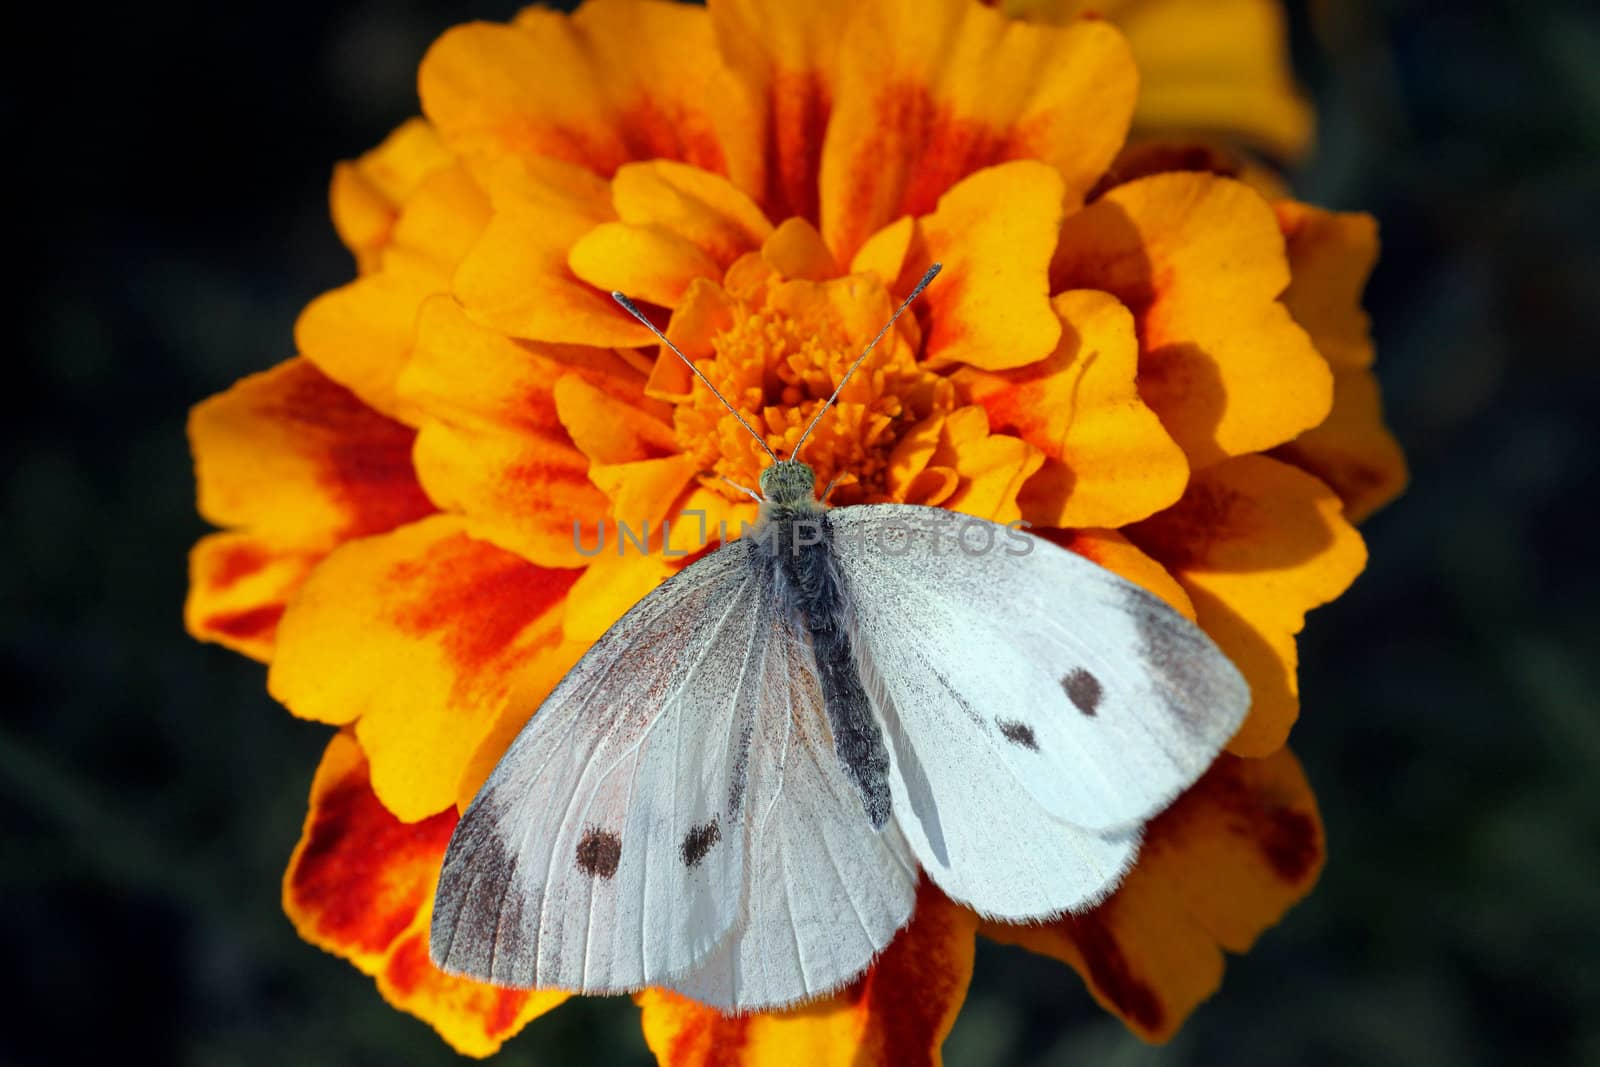 white cabbage butterfly sitting on flower (marigold)